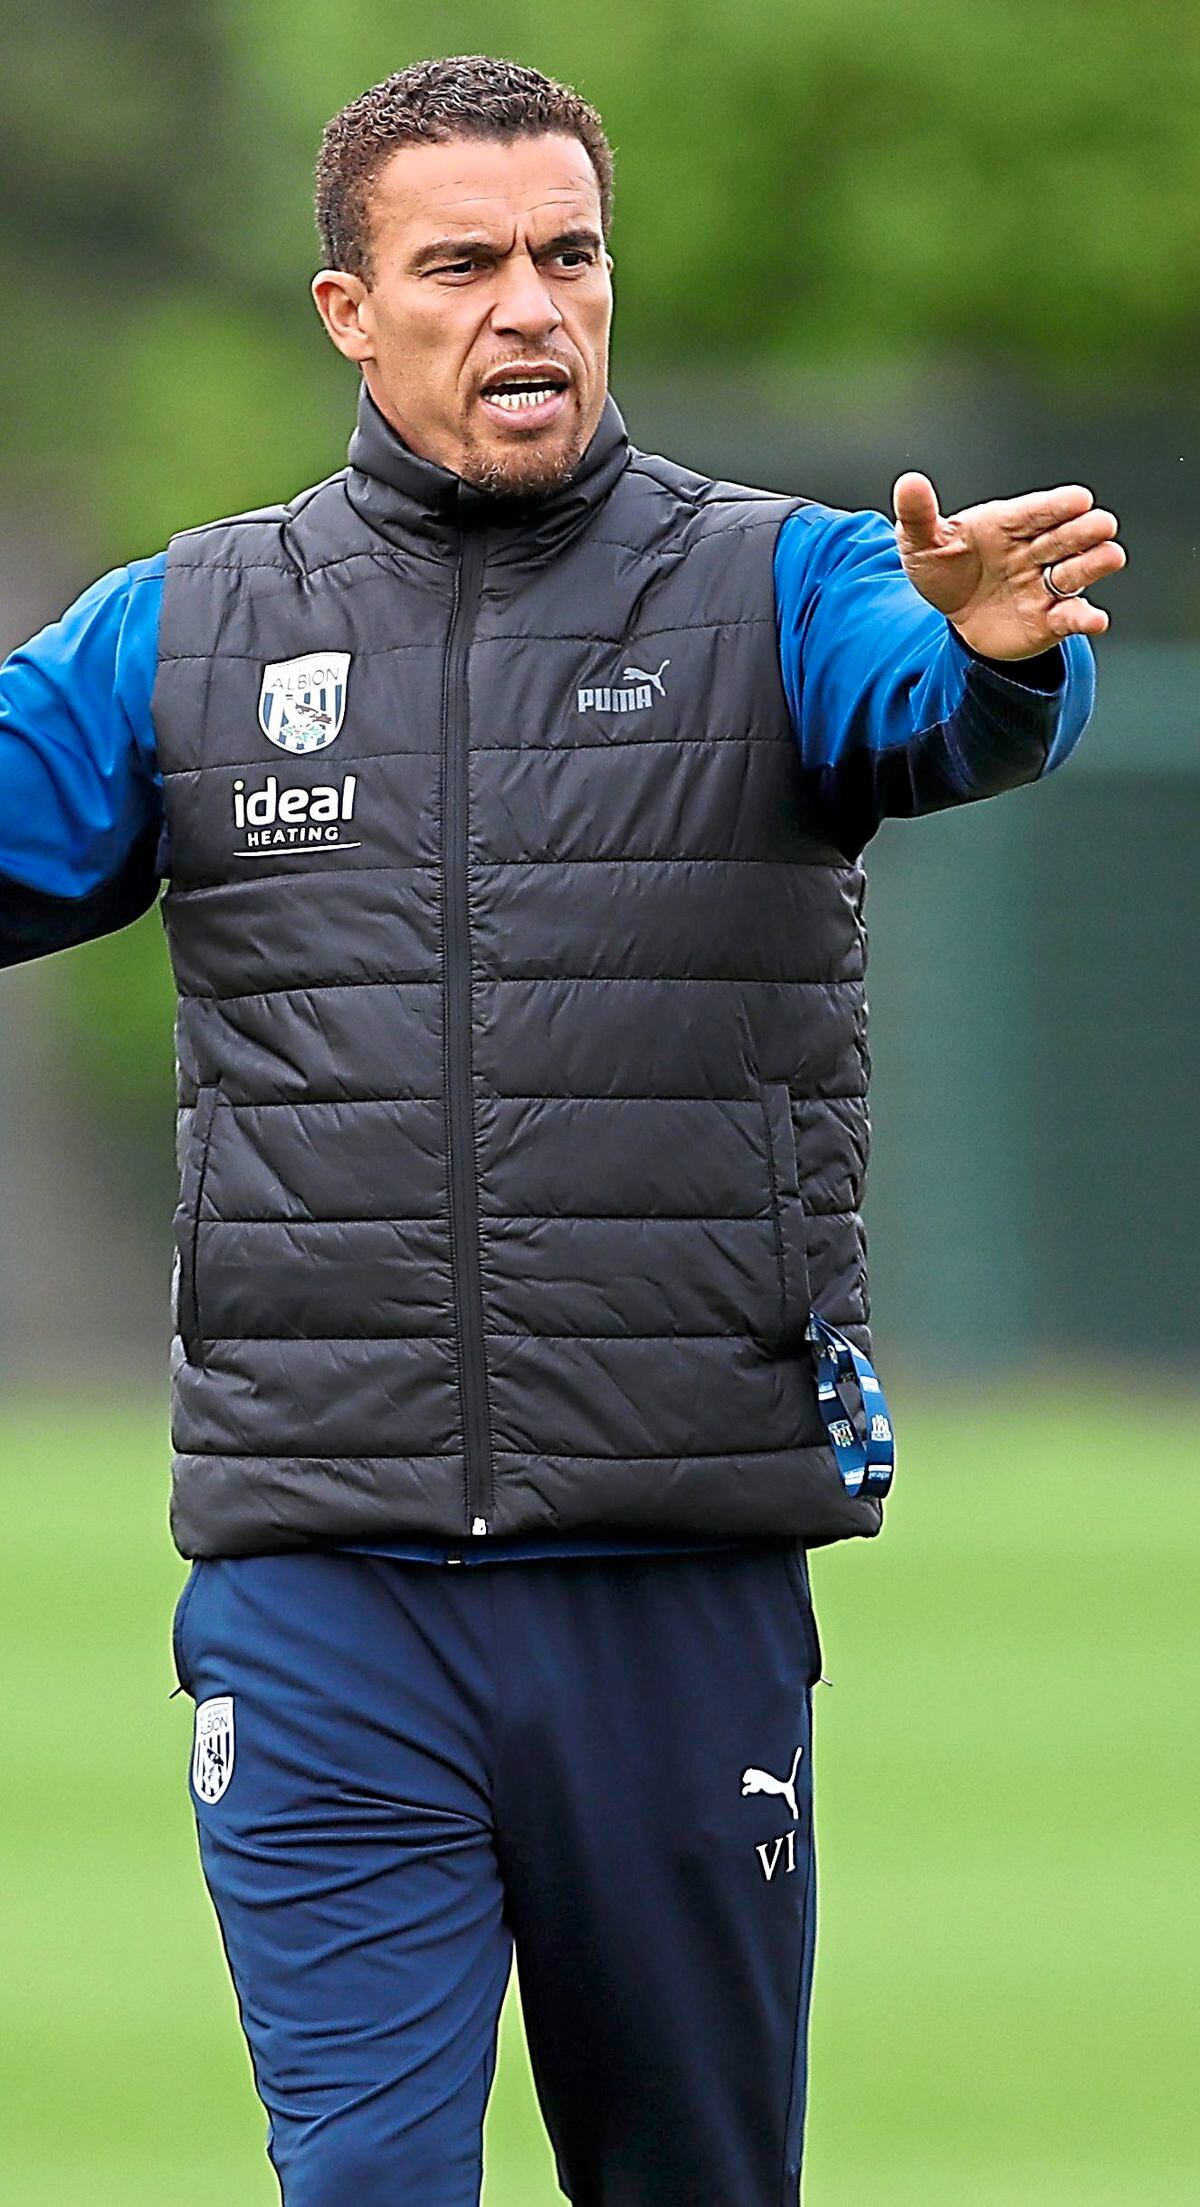 WALSALL, ENGLAND - OCTOBER 13: .Valerien Ismael Head Coach / Manager of West Bromwich Albion at West Bromwich Albion Training Ground on October 13, 2021 in Walsall, England. (Photo by Adam Fradgley/West Bromwich Albion FC via Getty Images).